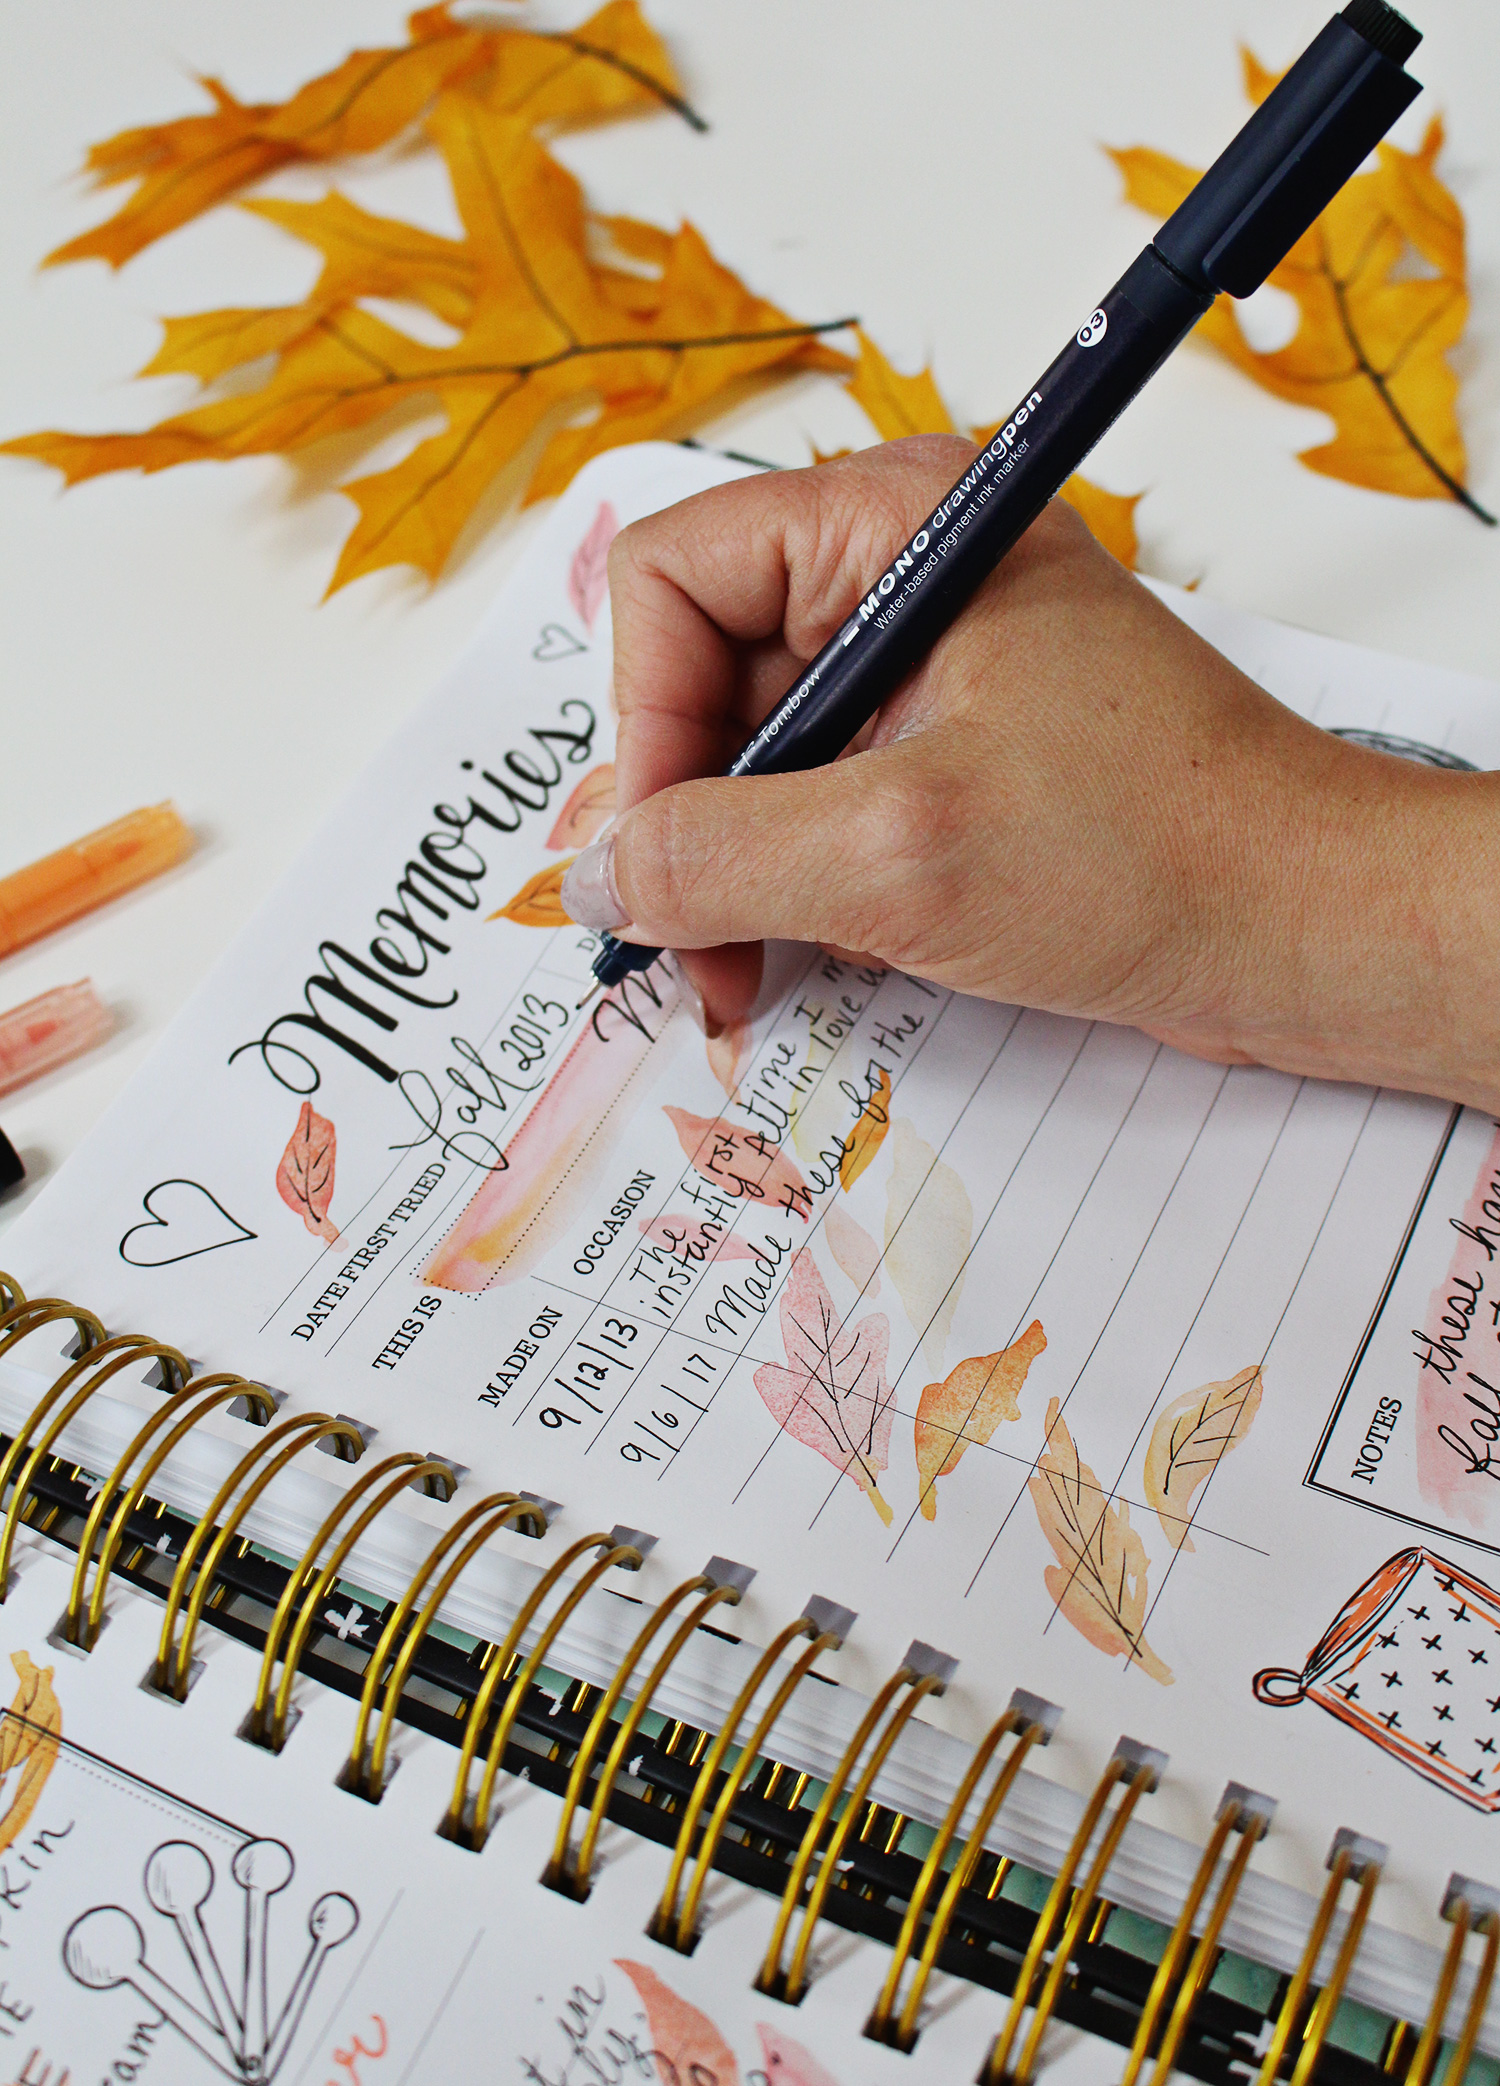 Pumpkin Cheesecake Bar Recipe in my Keepsake Kitchen Diary using Planner Supplies like New Tombow Markers & Pens